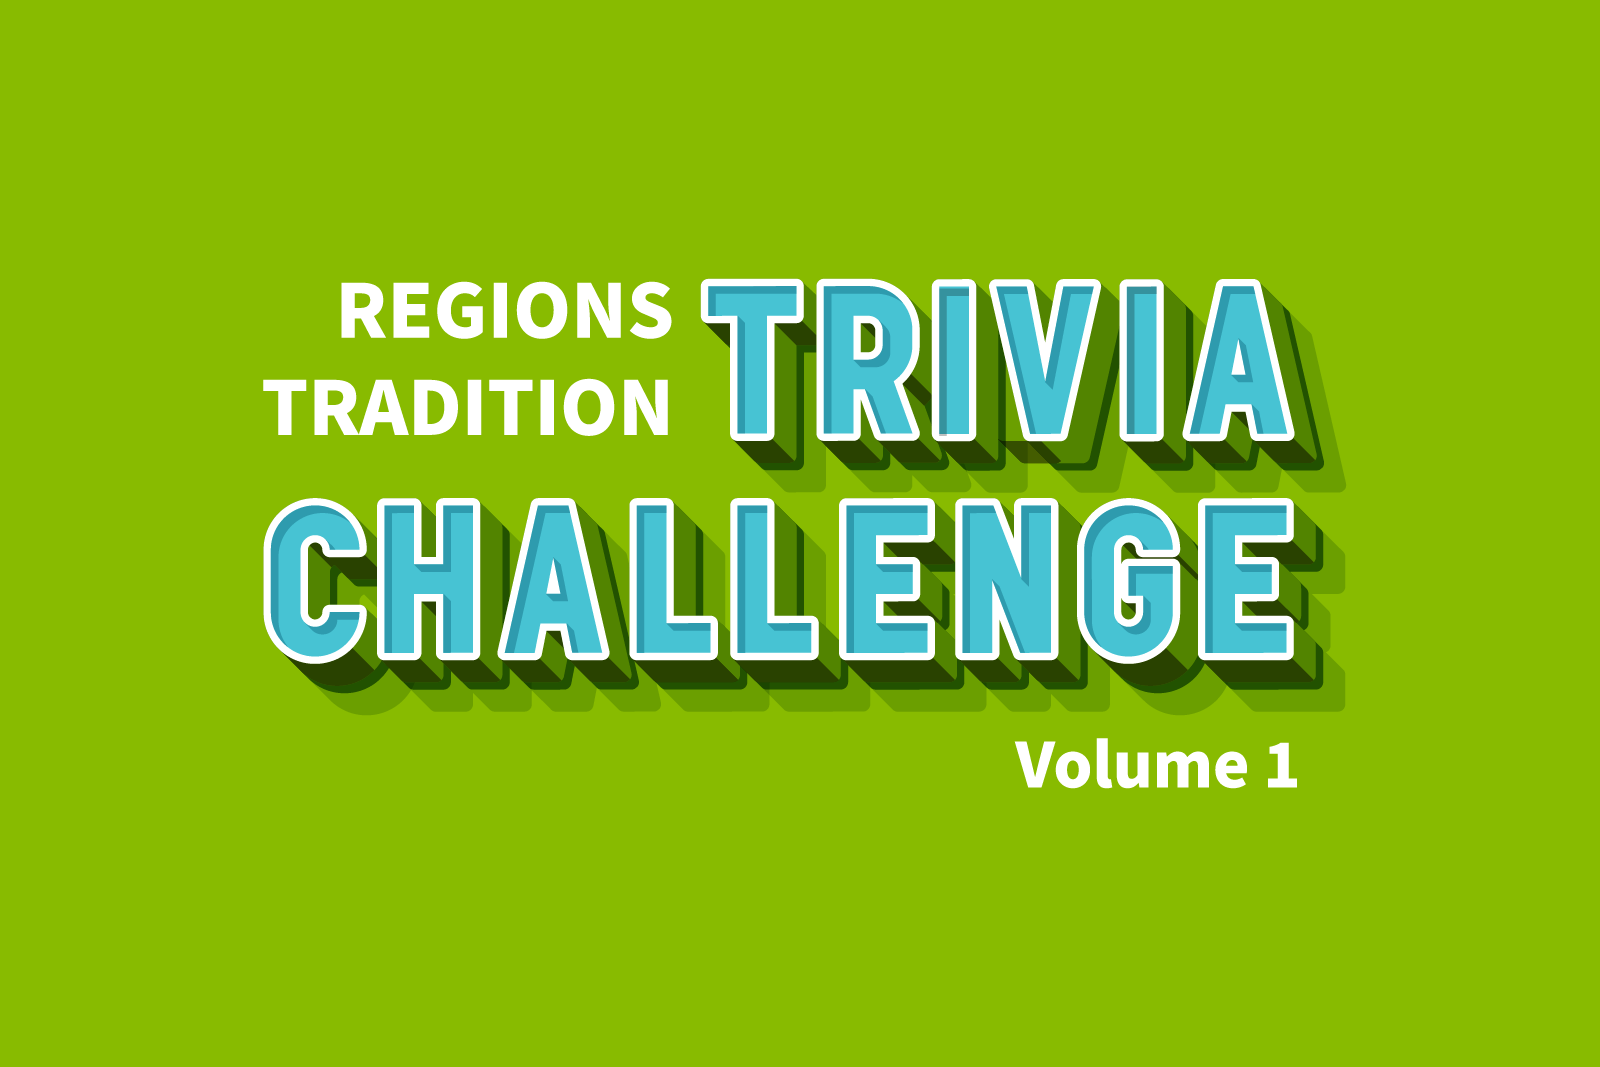 text that reads, "Regions Tradition Trivia Challenge, Volume 1."